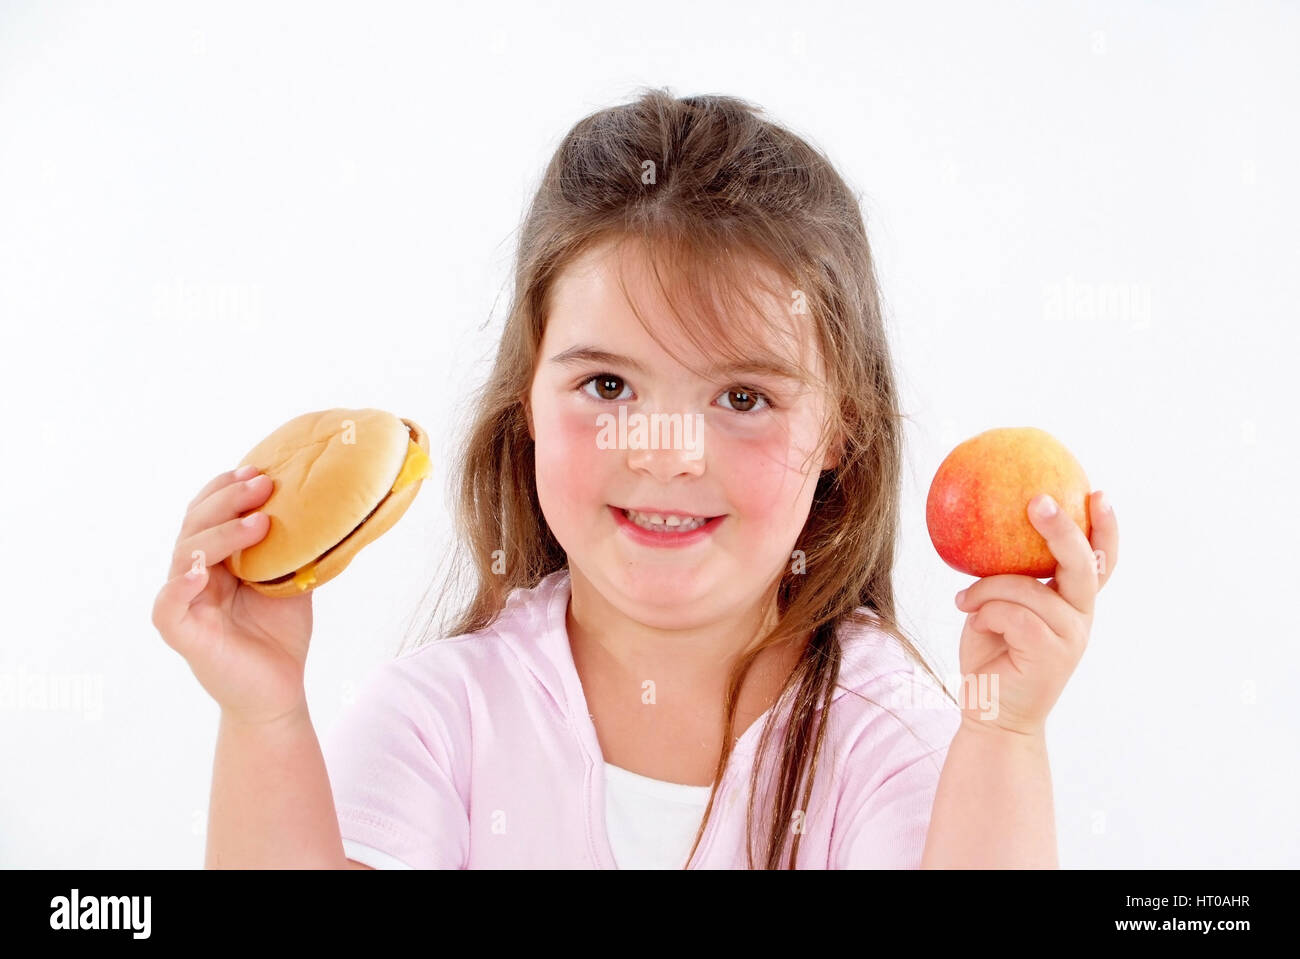 Molliges M?dchen mit Burger und Apfel - chubby girl with burger and apple Stock Photo